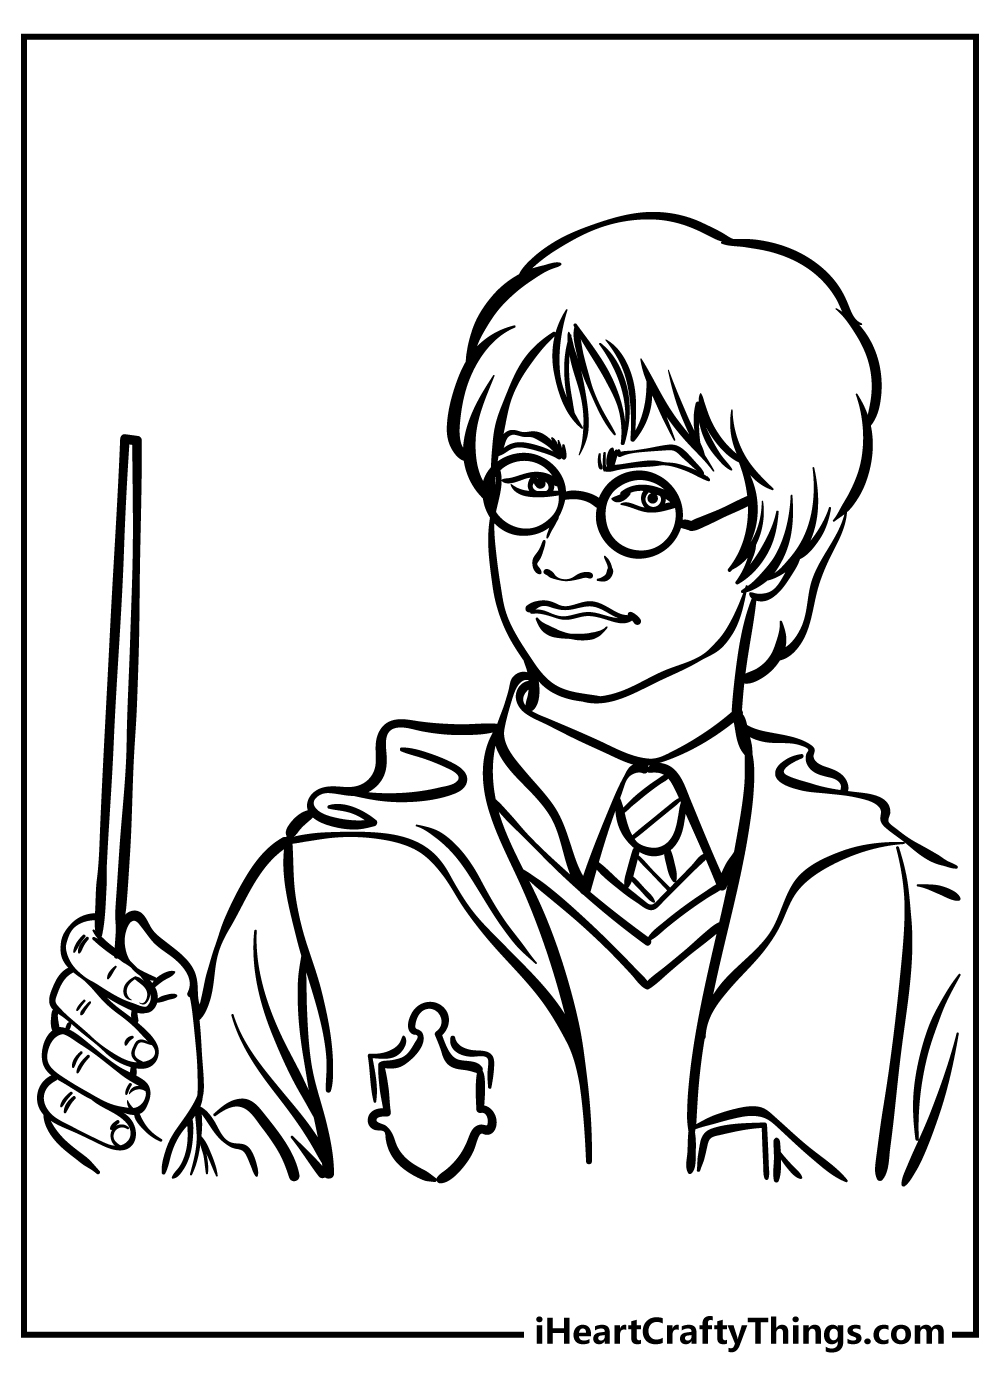 Harry Potter Coloring Pages for preschoolers free printable